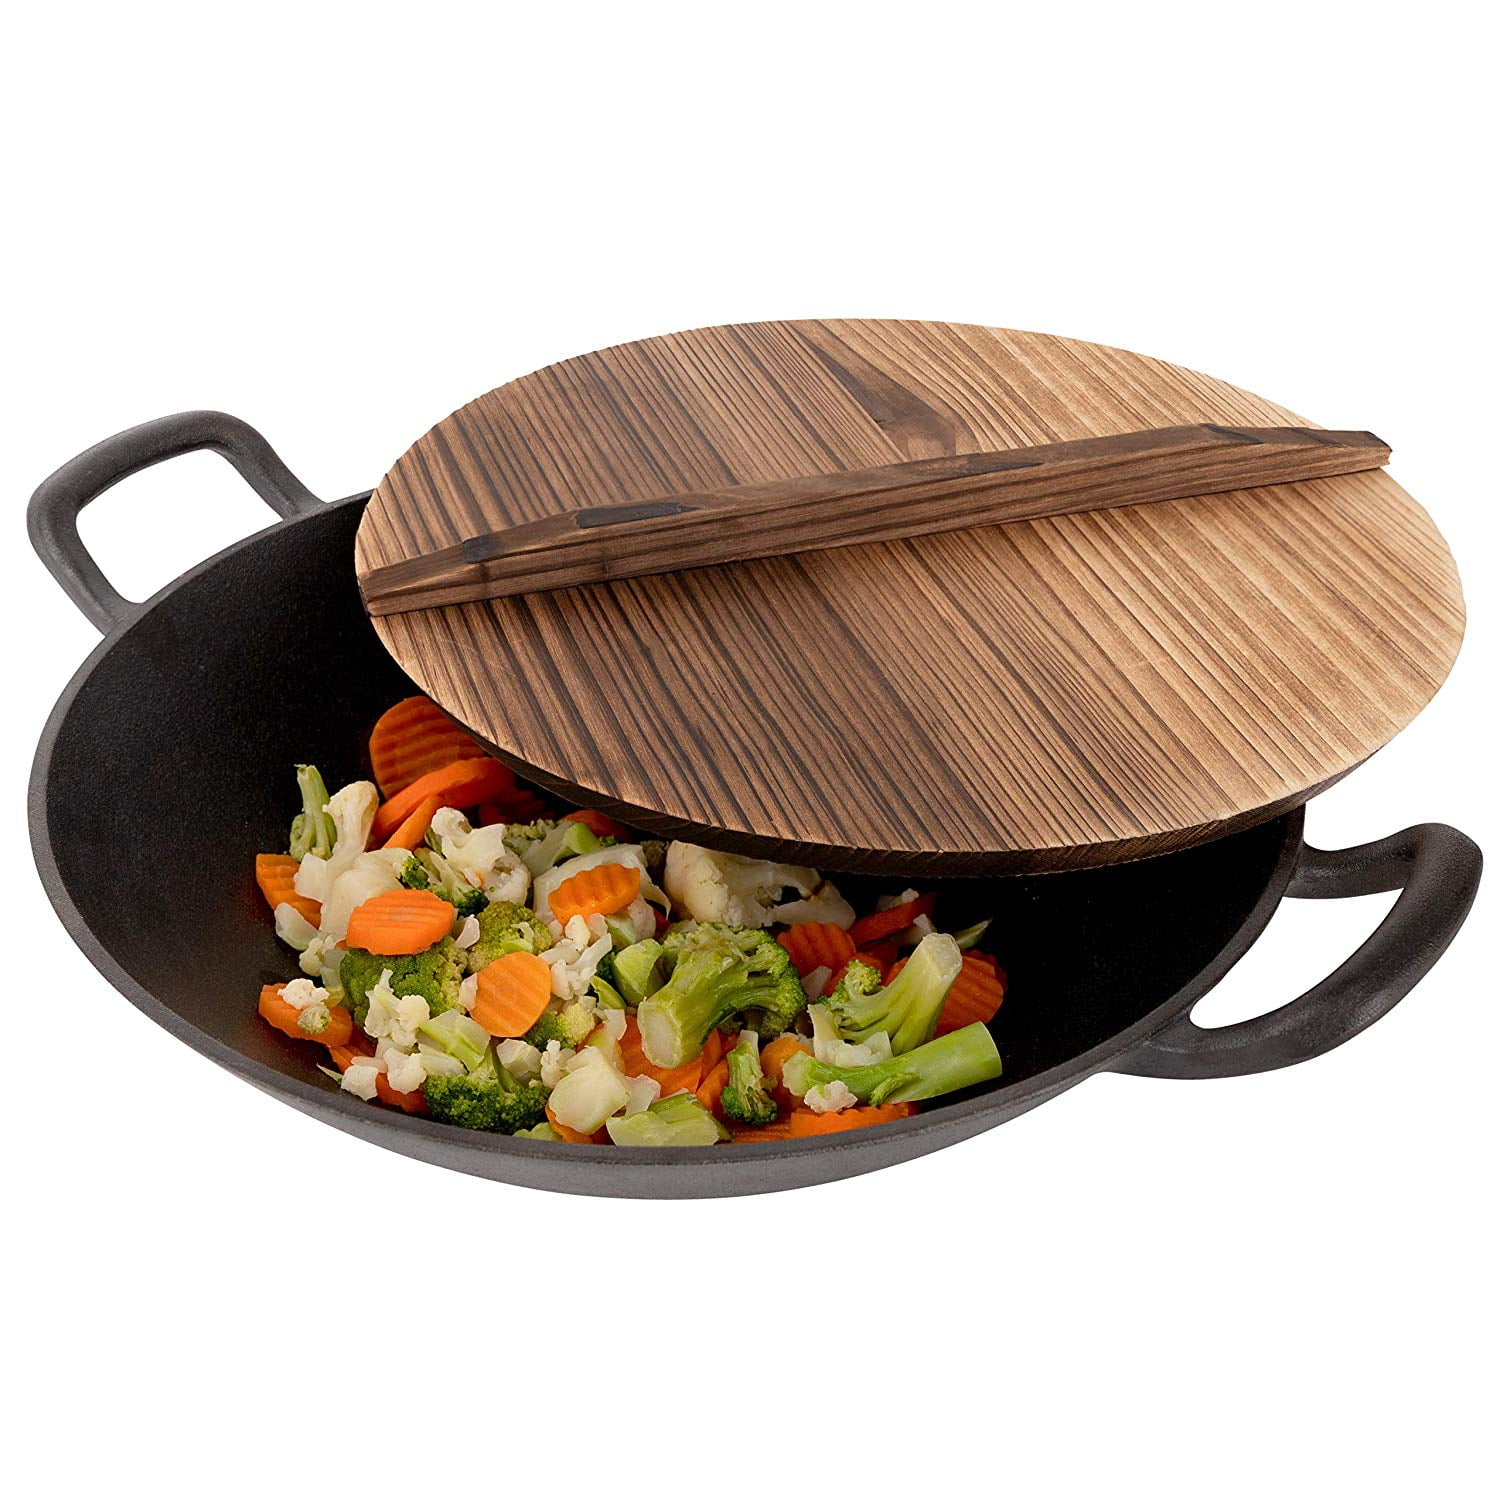 Kasian House Cast Iron Wok Pre-Seasoned with Wooden Lid 12 Diameter and Large Handles Stir Fry Pan 